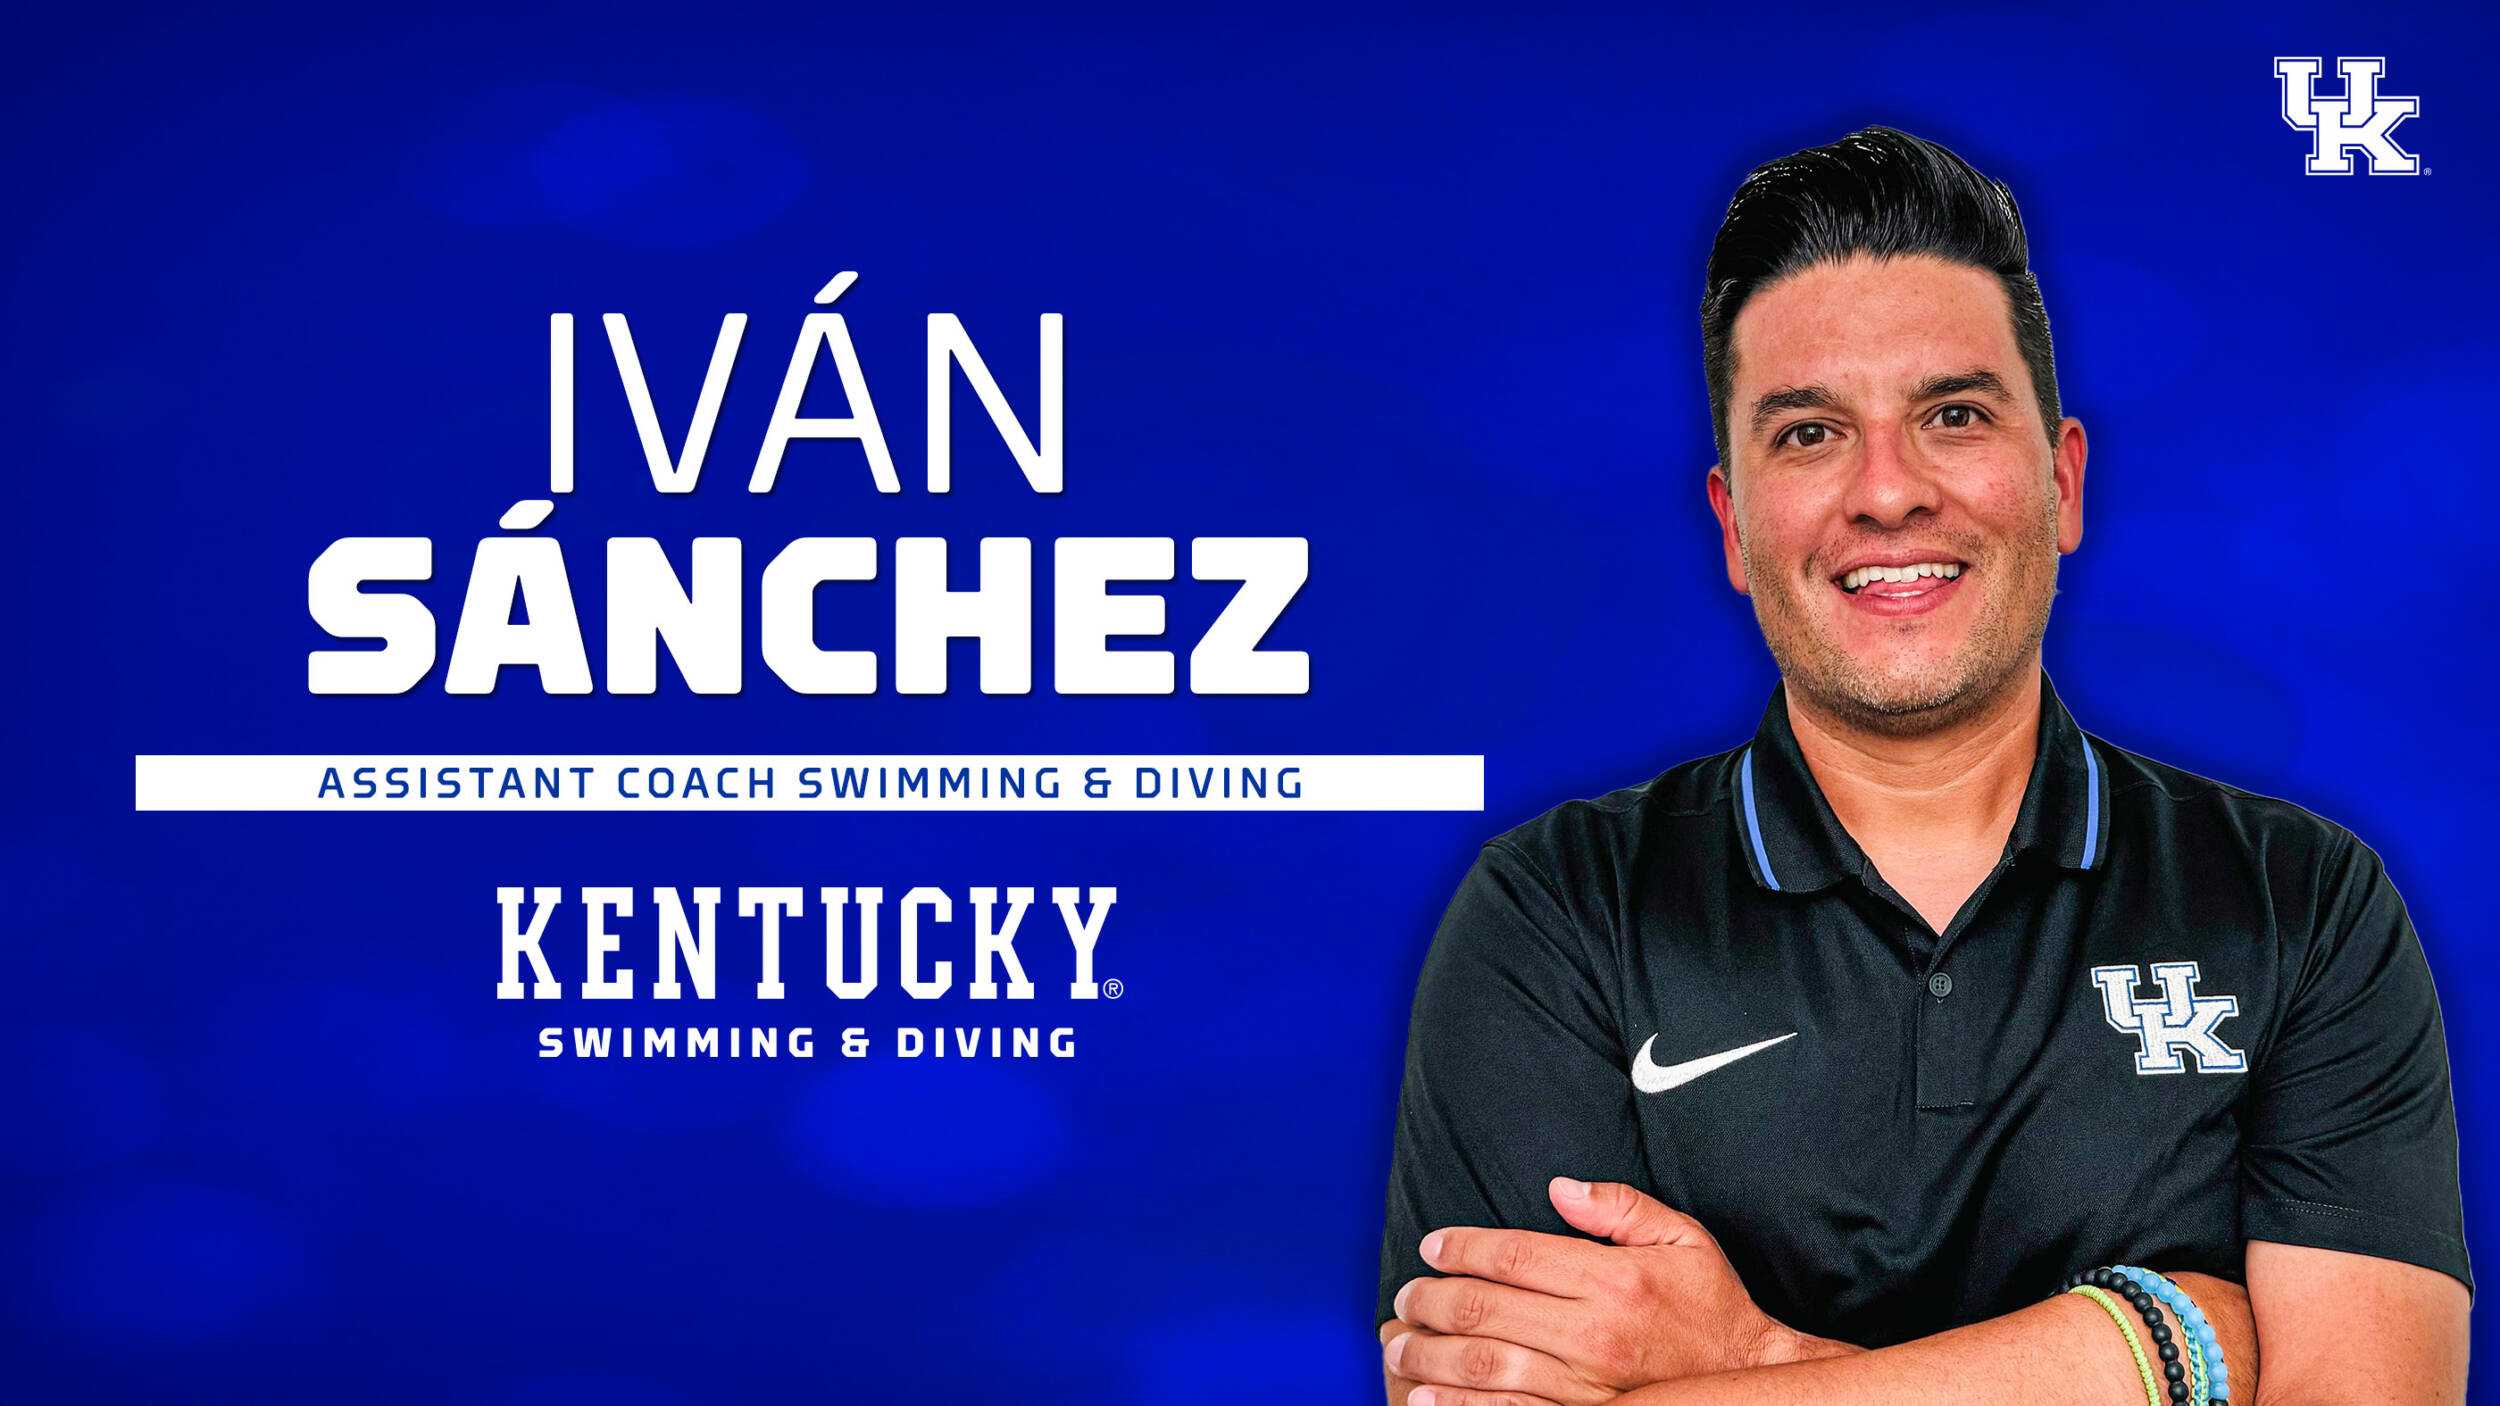 Iván Sánchez Hired as Swimming & Diving Assistant